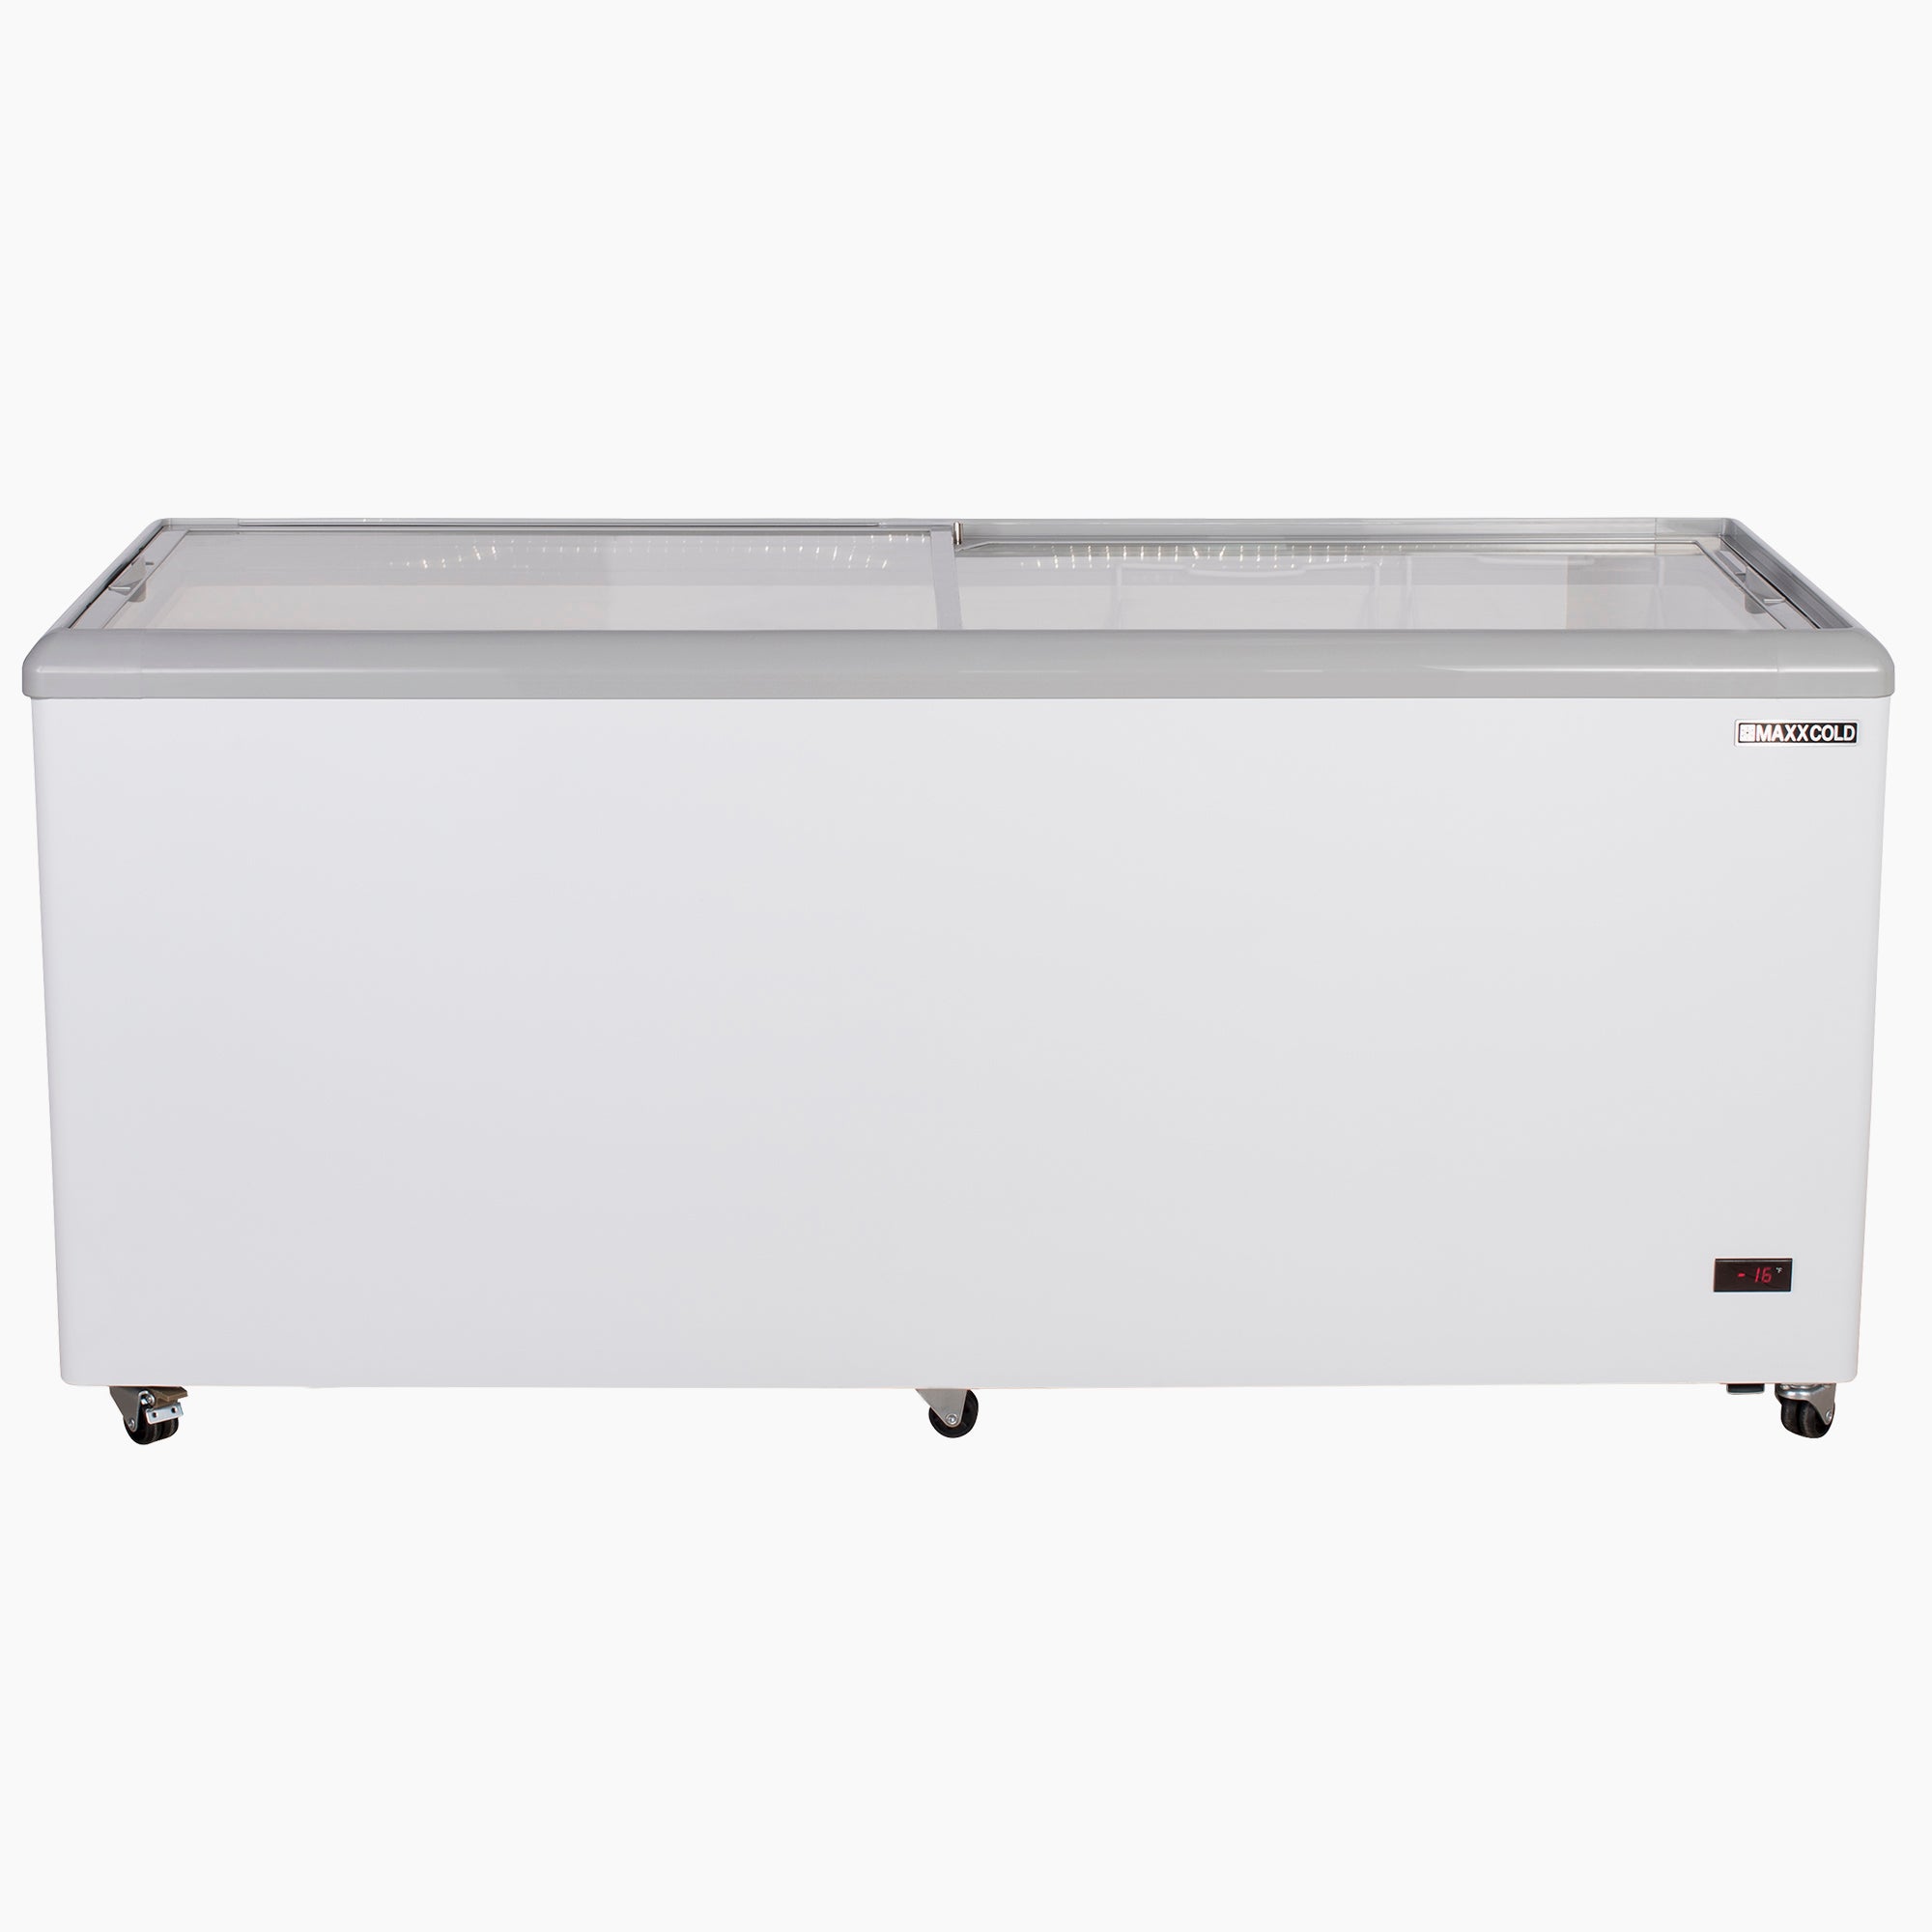 Maxx Cold - MXF71F, Maxx Cold Sliding Glass Top Mobile Ice Cream Display Freezer, 71"W, 16 cu. ft. (453L) Storage Capacity, Equipped with 5 Baskets, in White